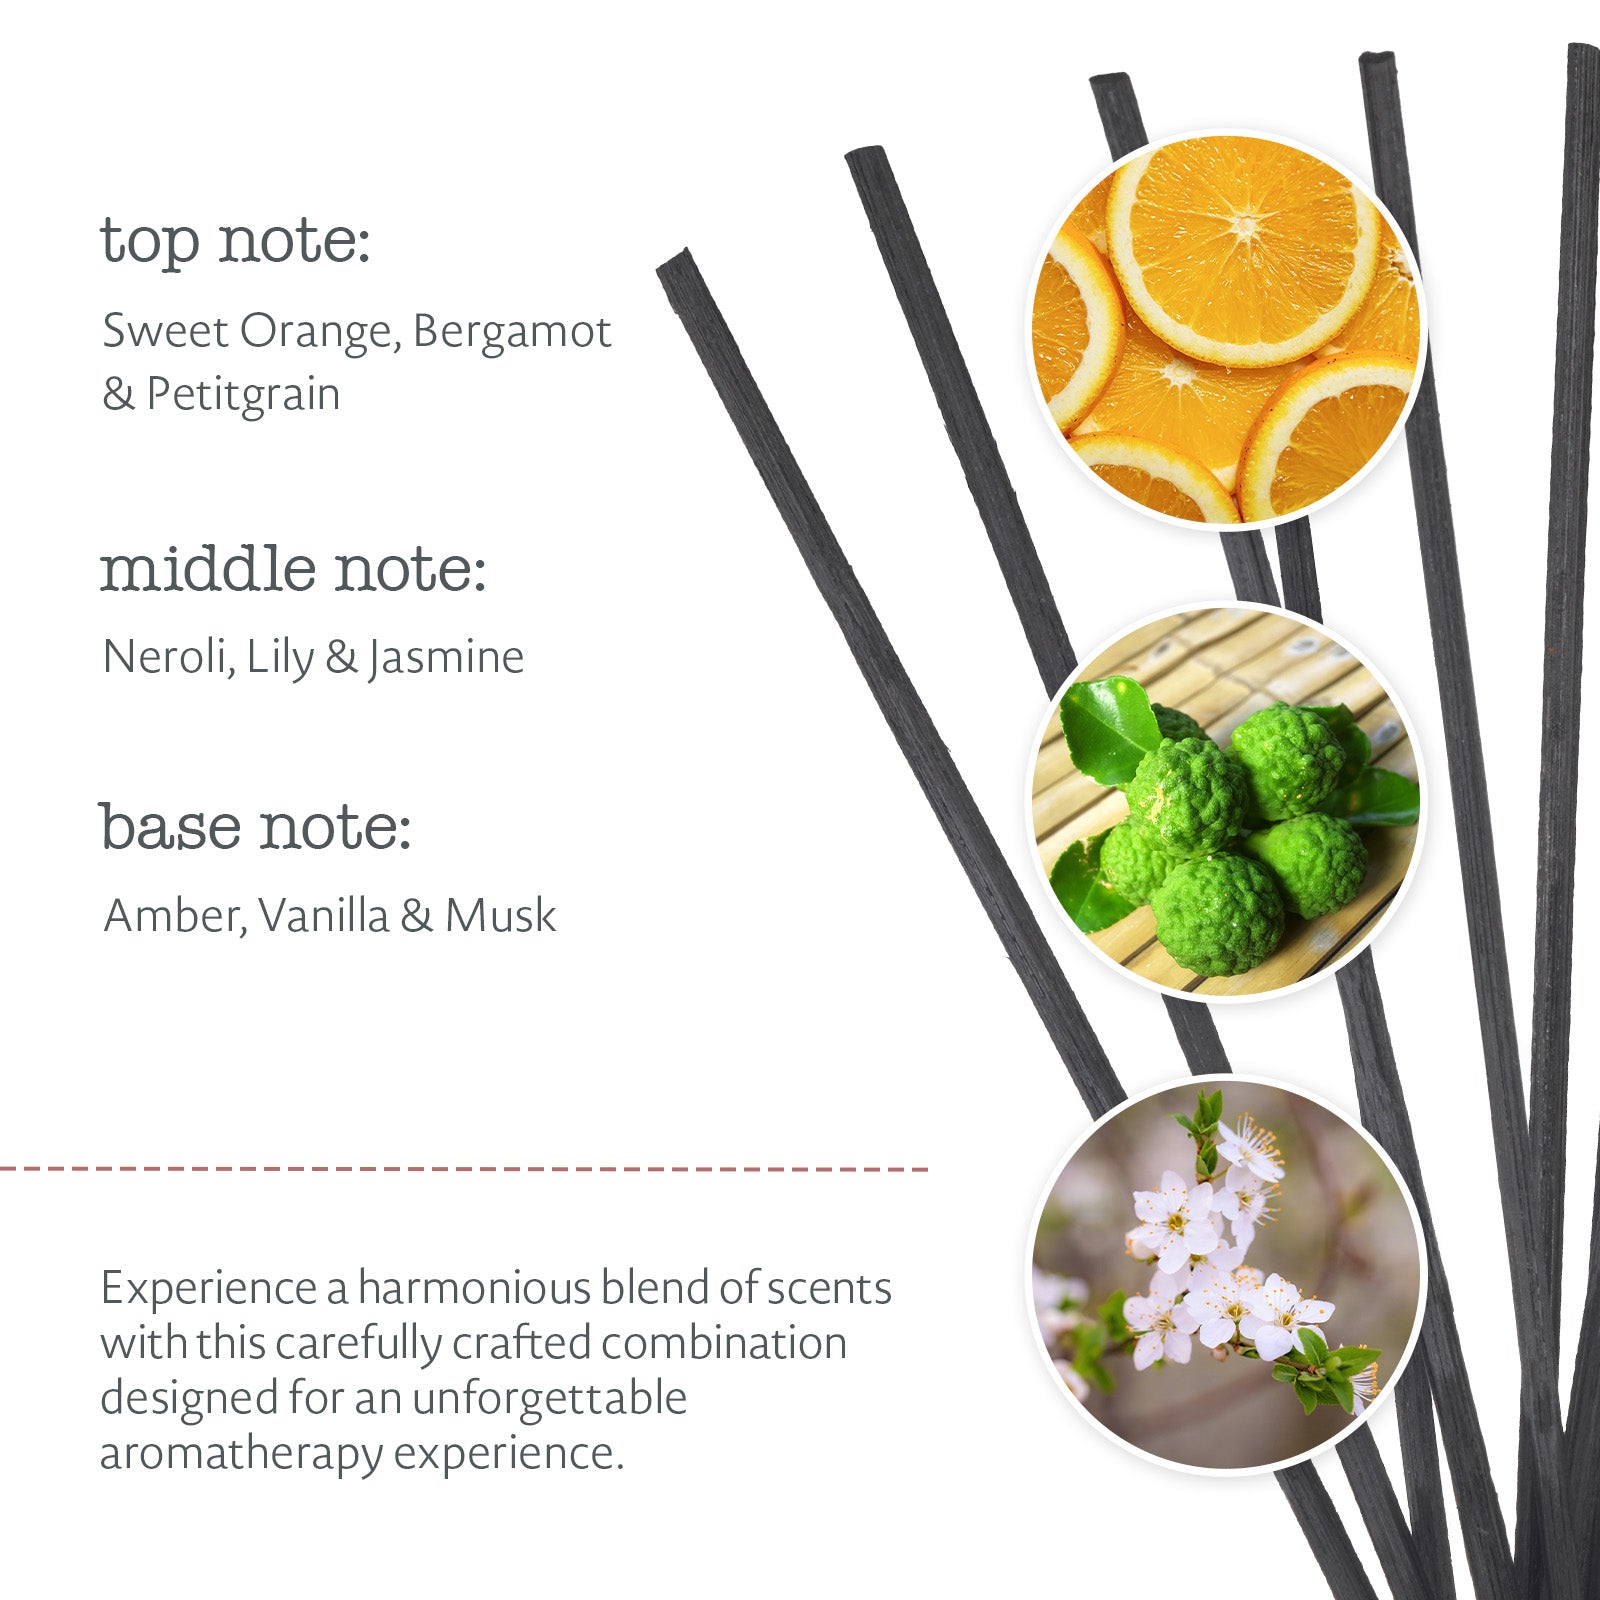 Zest Reed Diffuser Refill